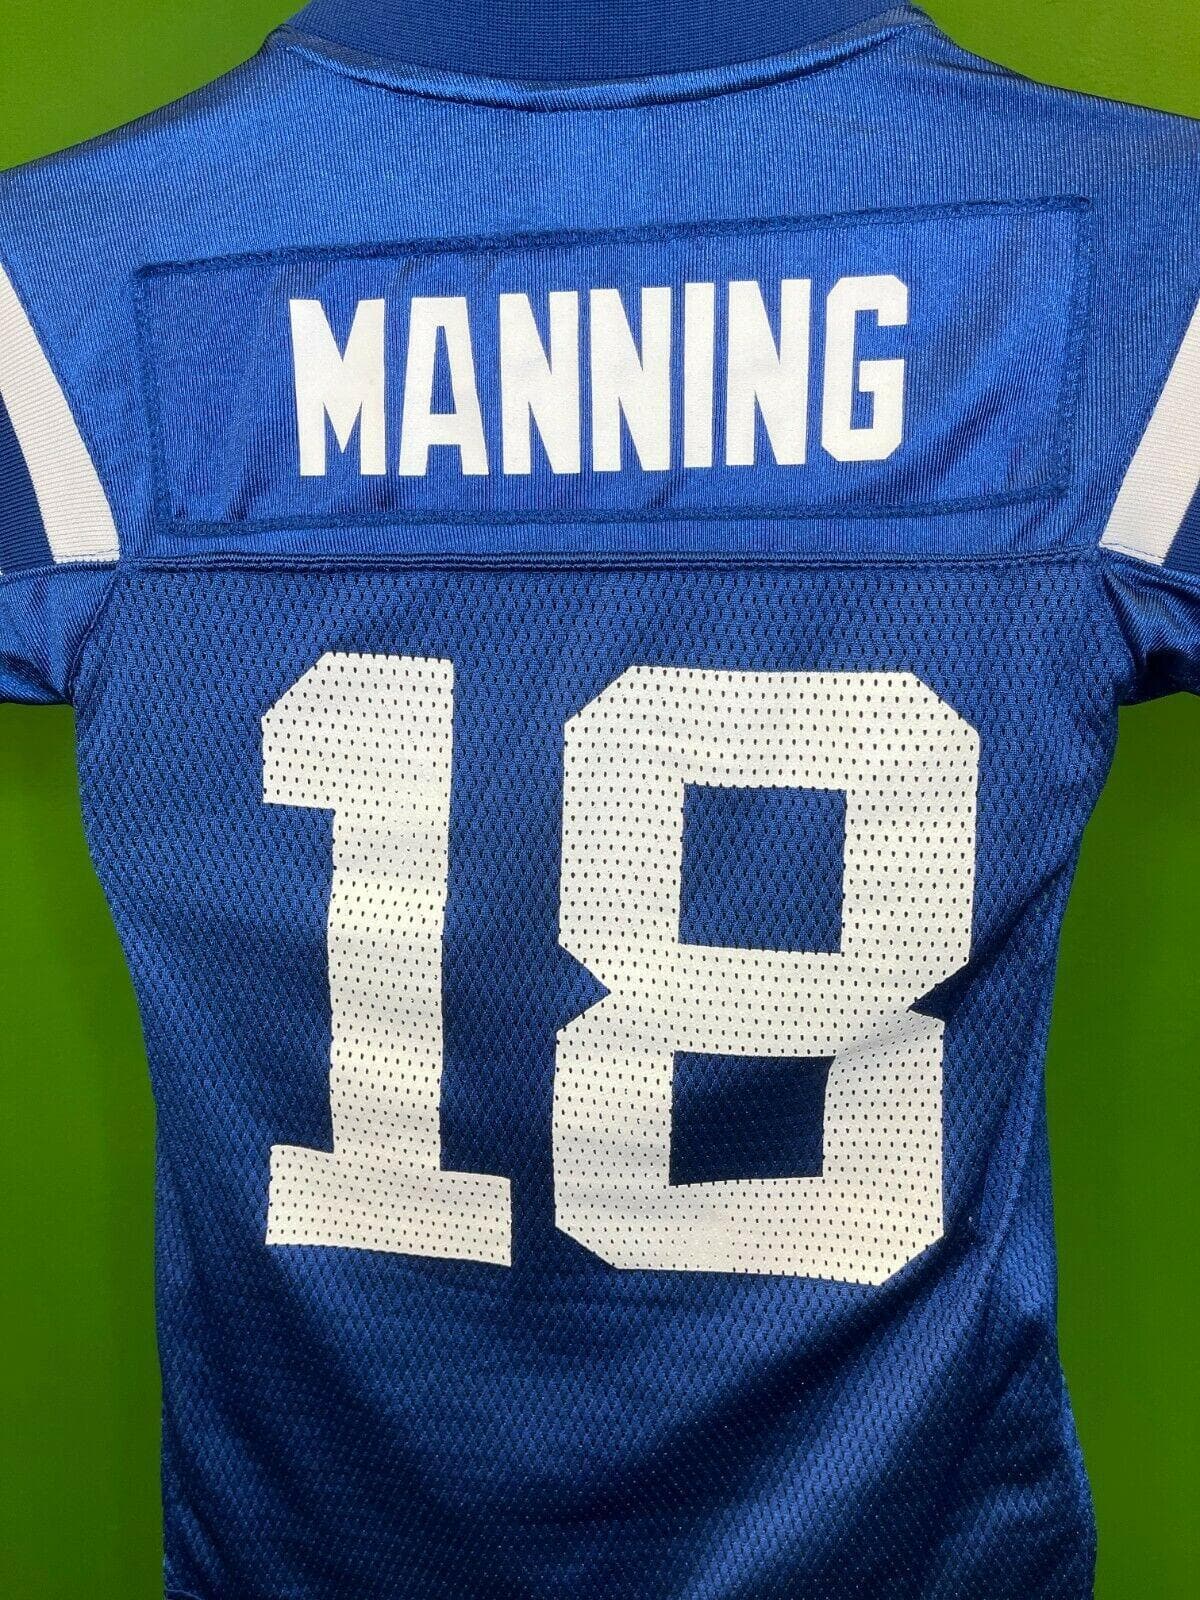 NFL Indianapolis Colts Peyton Manning #18 Reebok Jersey Youth Small 8